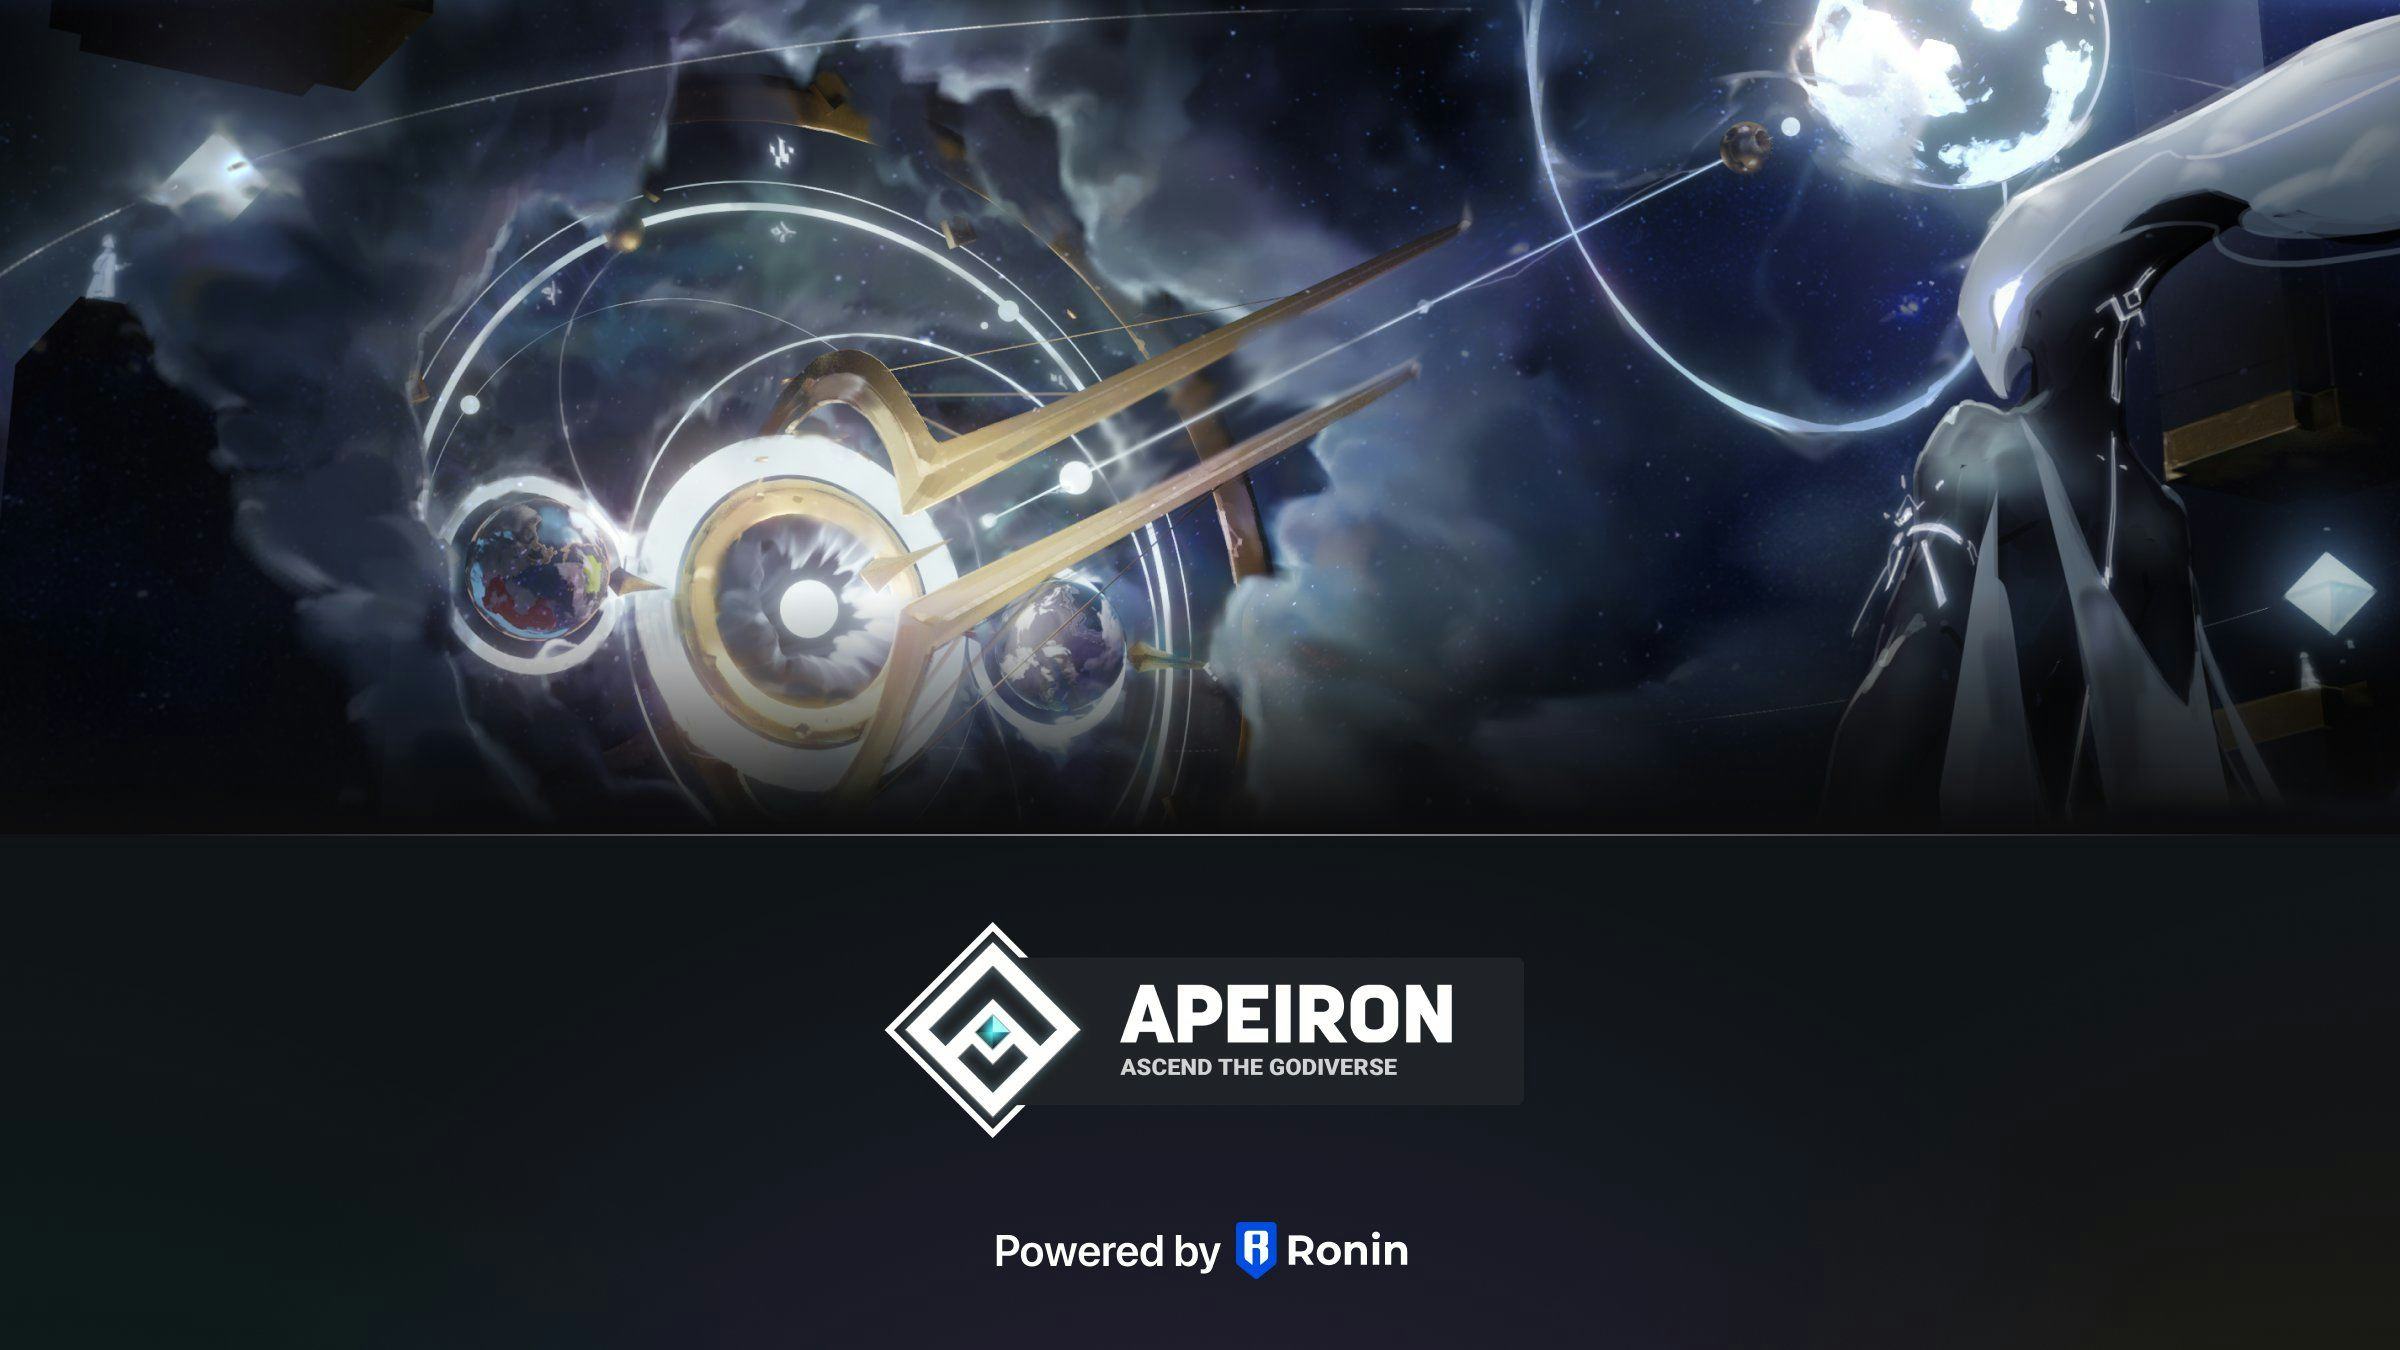 Apeiron Key Updates: Ronin Migration, Token Launch, & Epic Games Listing